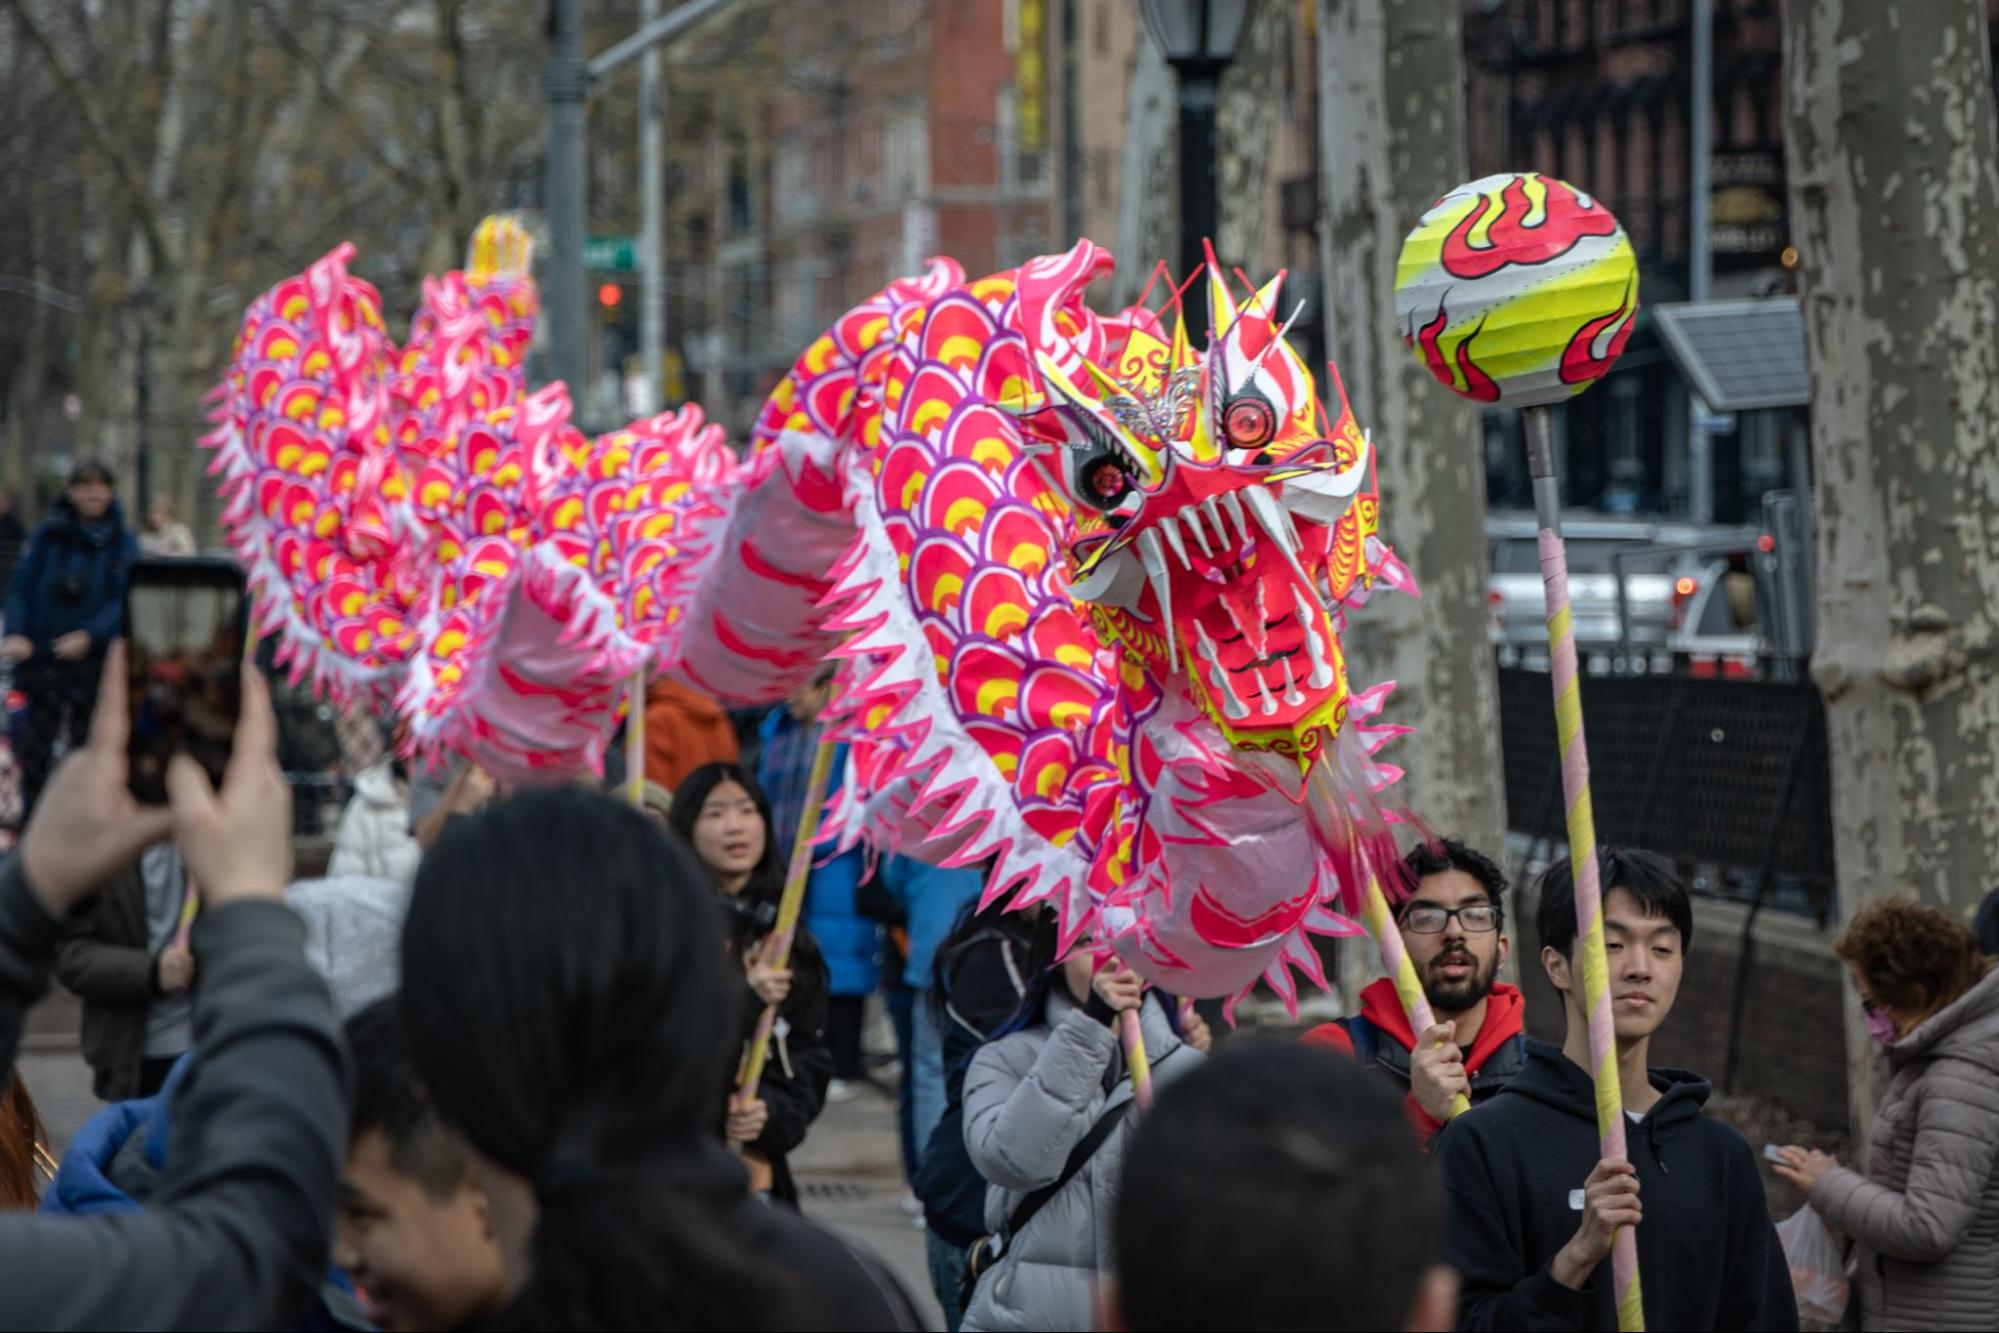 A red and yellow dragon held by a group of people marching down a street in a parade.